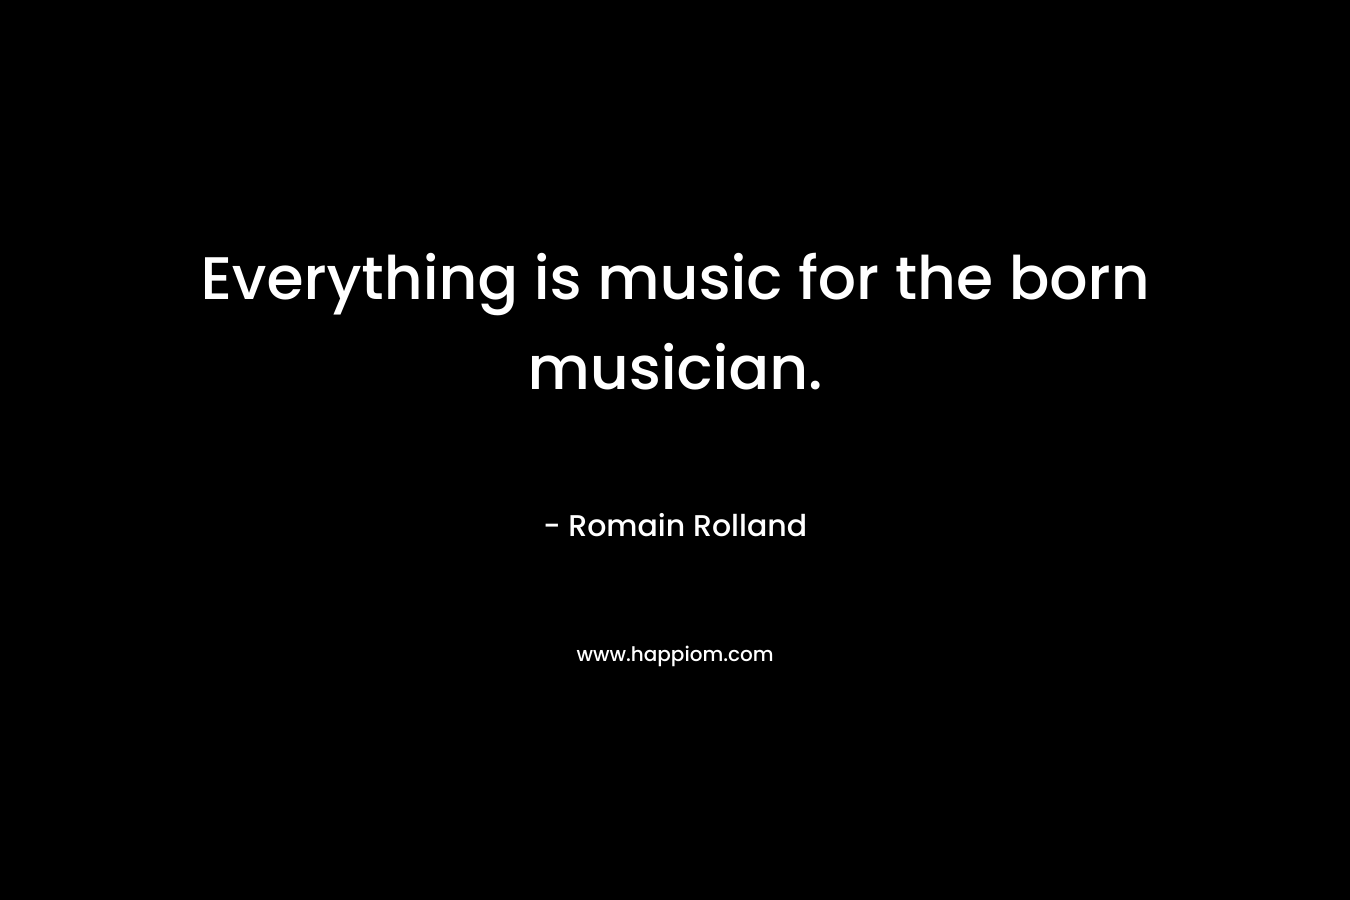 Everything is music for the born musician.